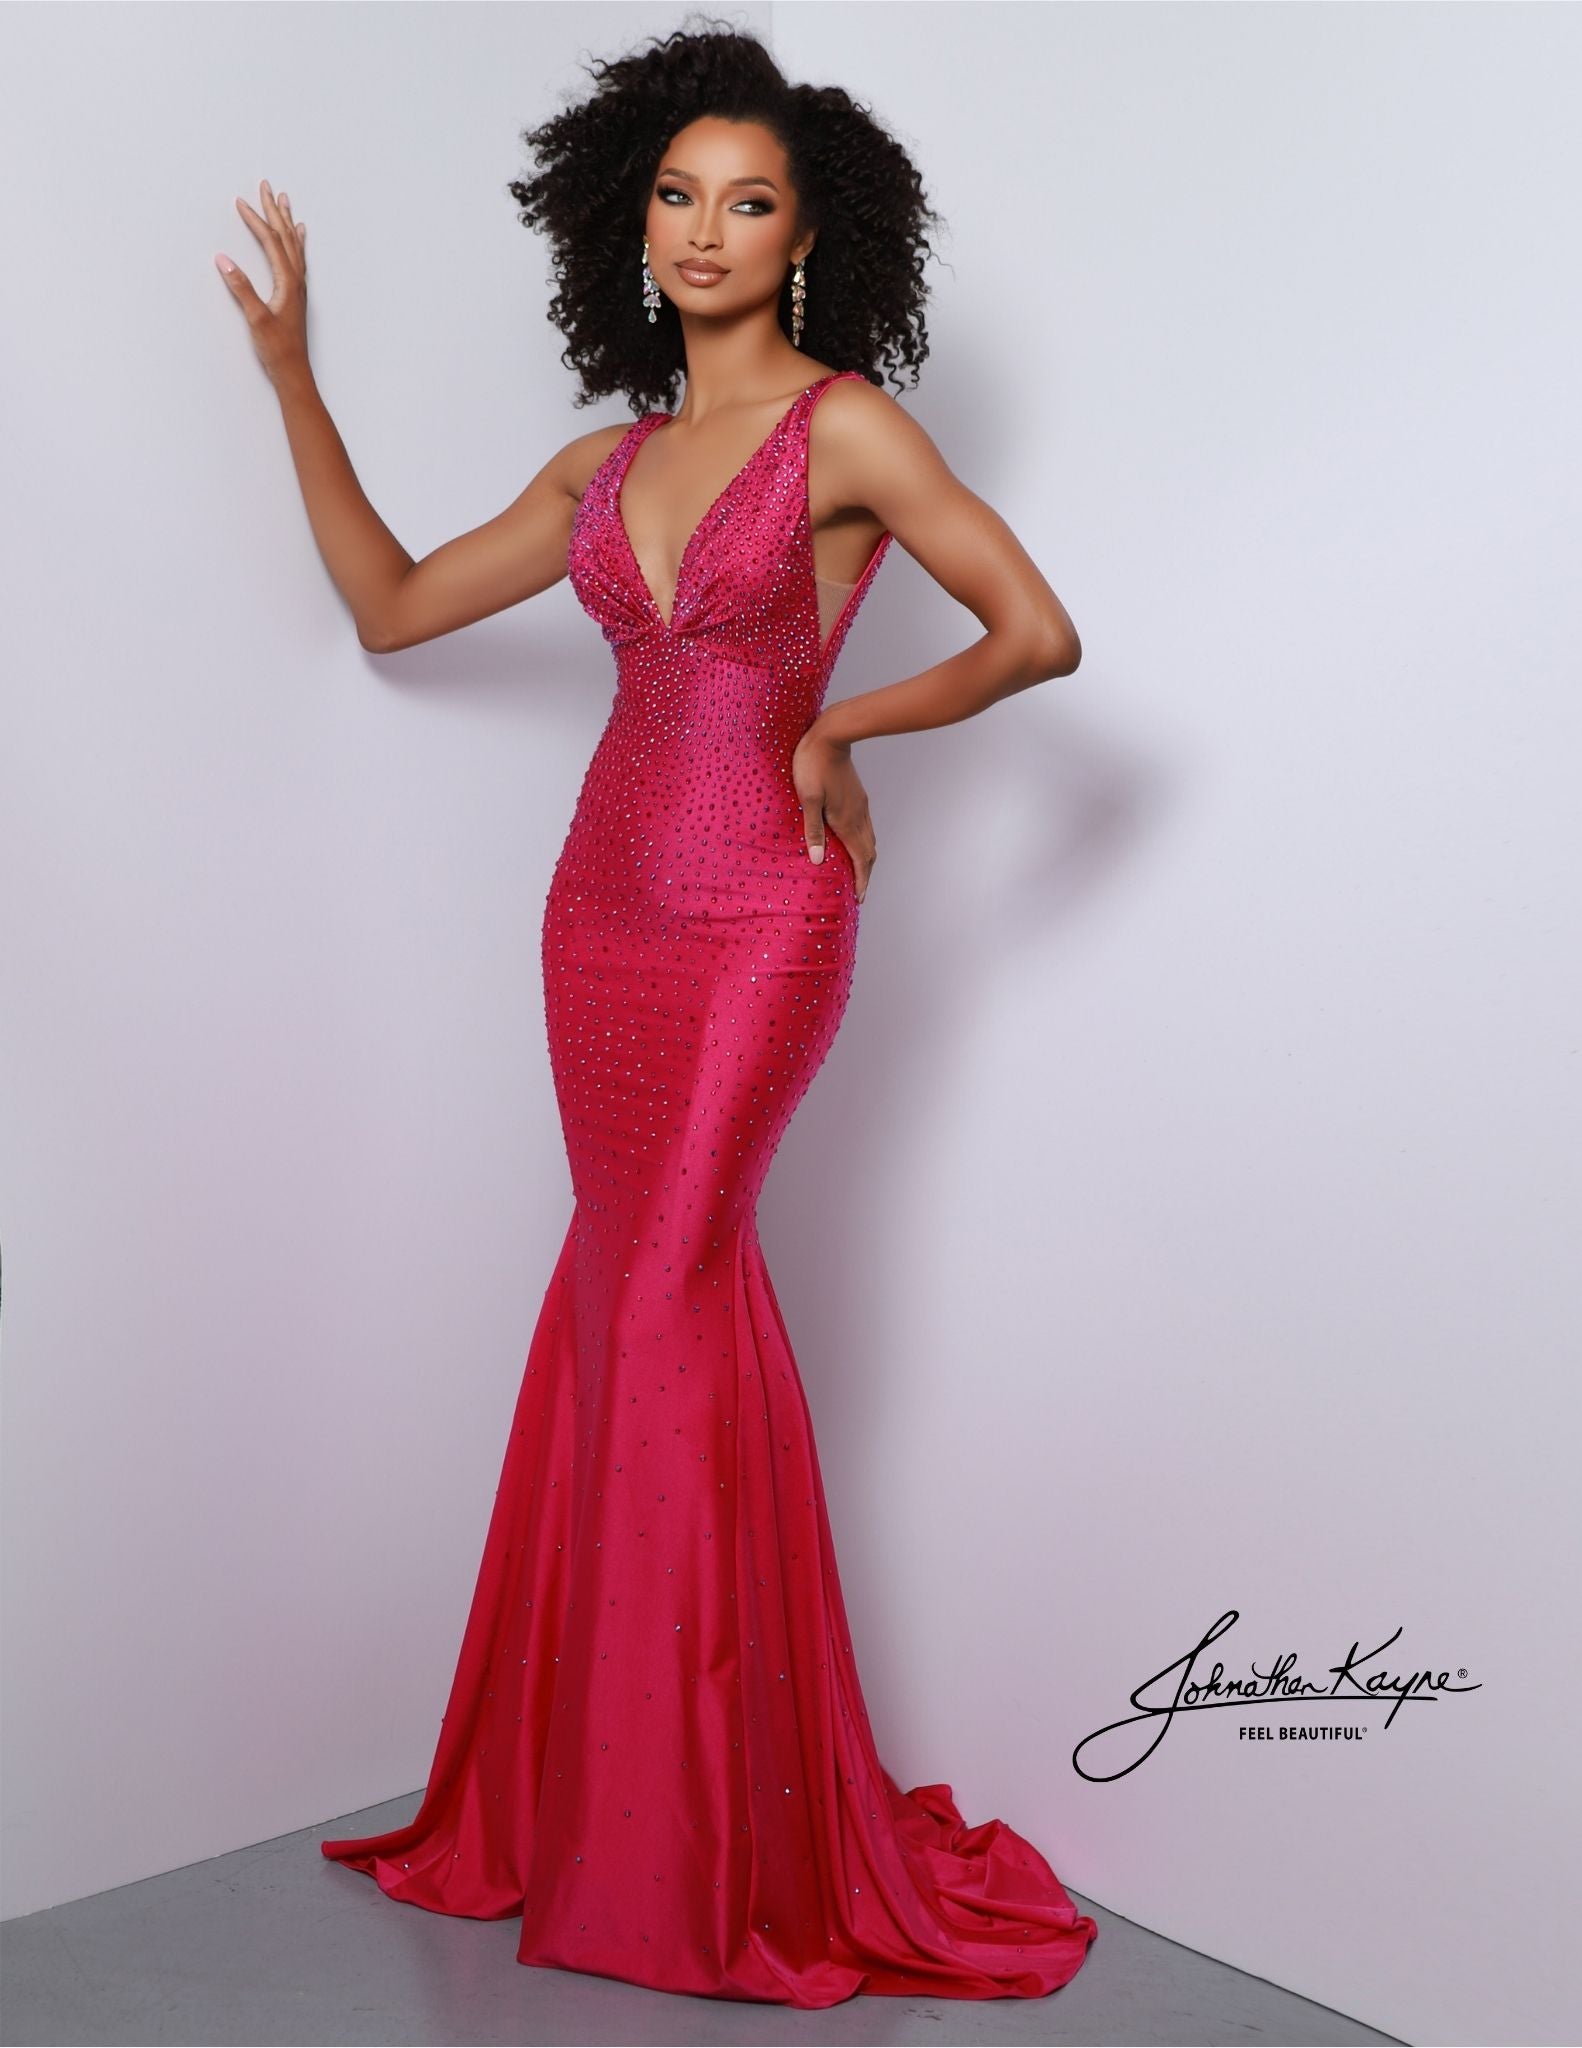 Johnathan Kayne 9213 is an embellished stretch Prom Dress, Pageant Gown & Formal Evening Wear. One of Johnathan Kayne's favorite styles for the Fall season, this elegant 4 way stretch lycra gown has a modern empire bodice and hugs the body all the way to the dramatic train. Adorn in shimmering crystals, this gem of a gown will turn heads.